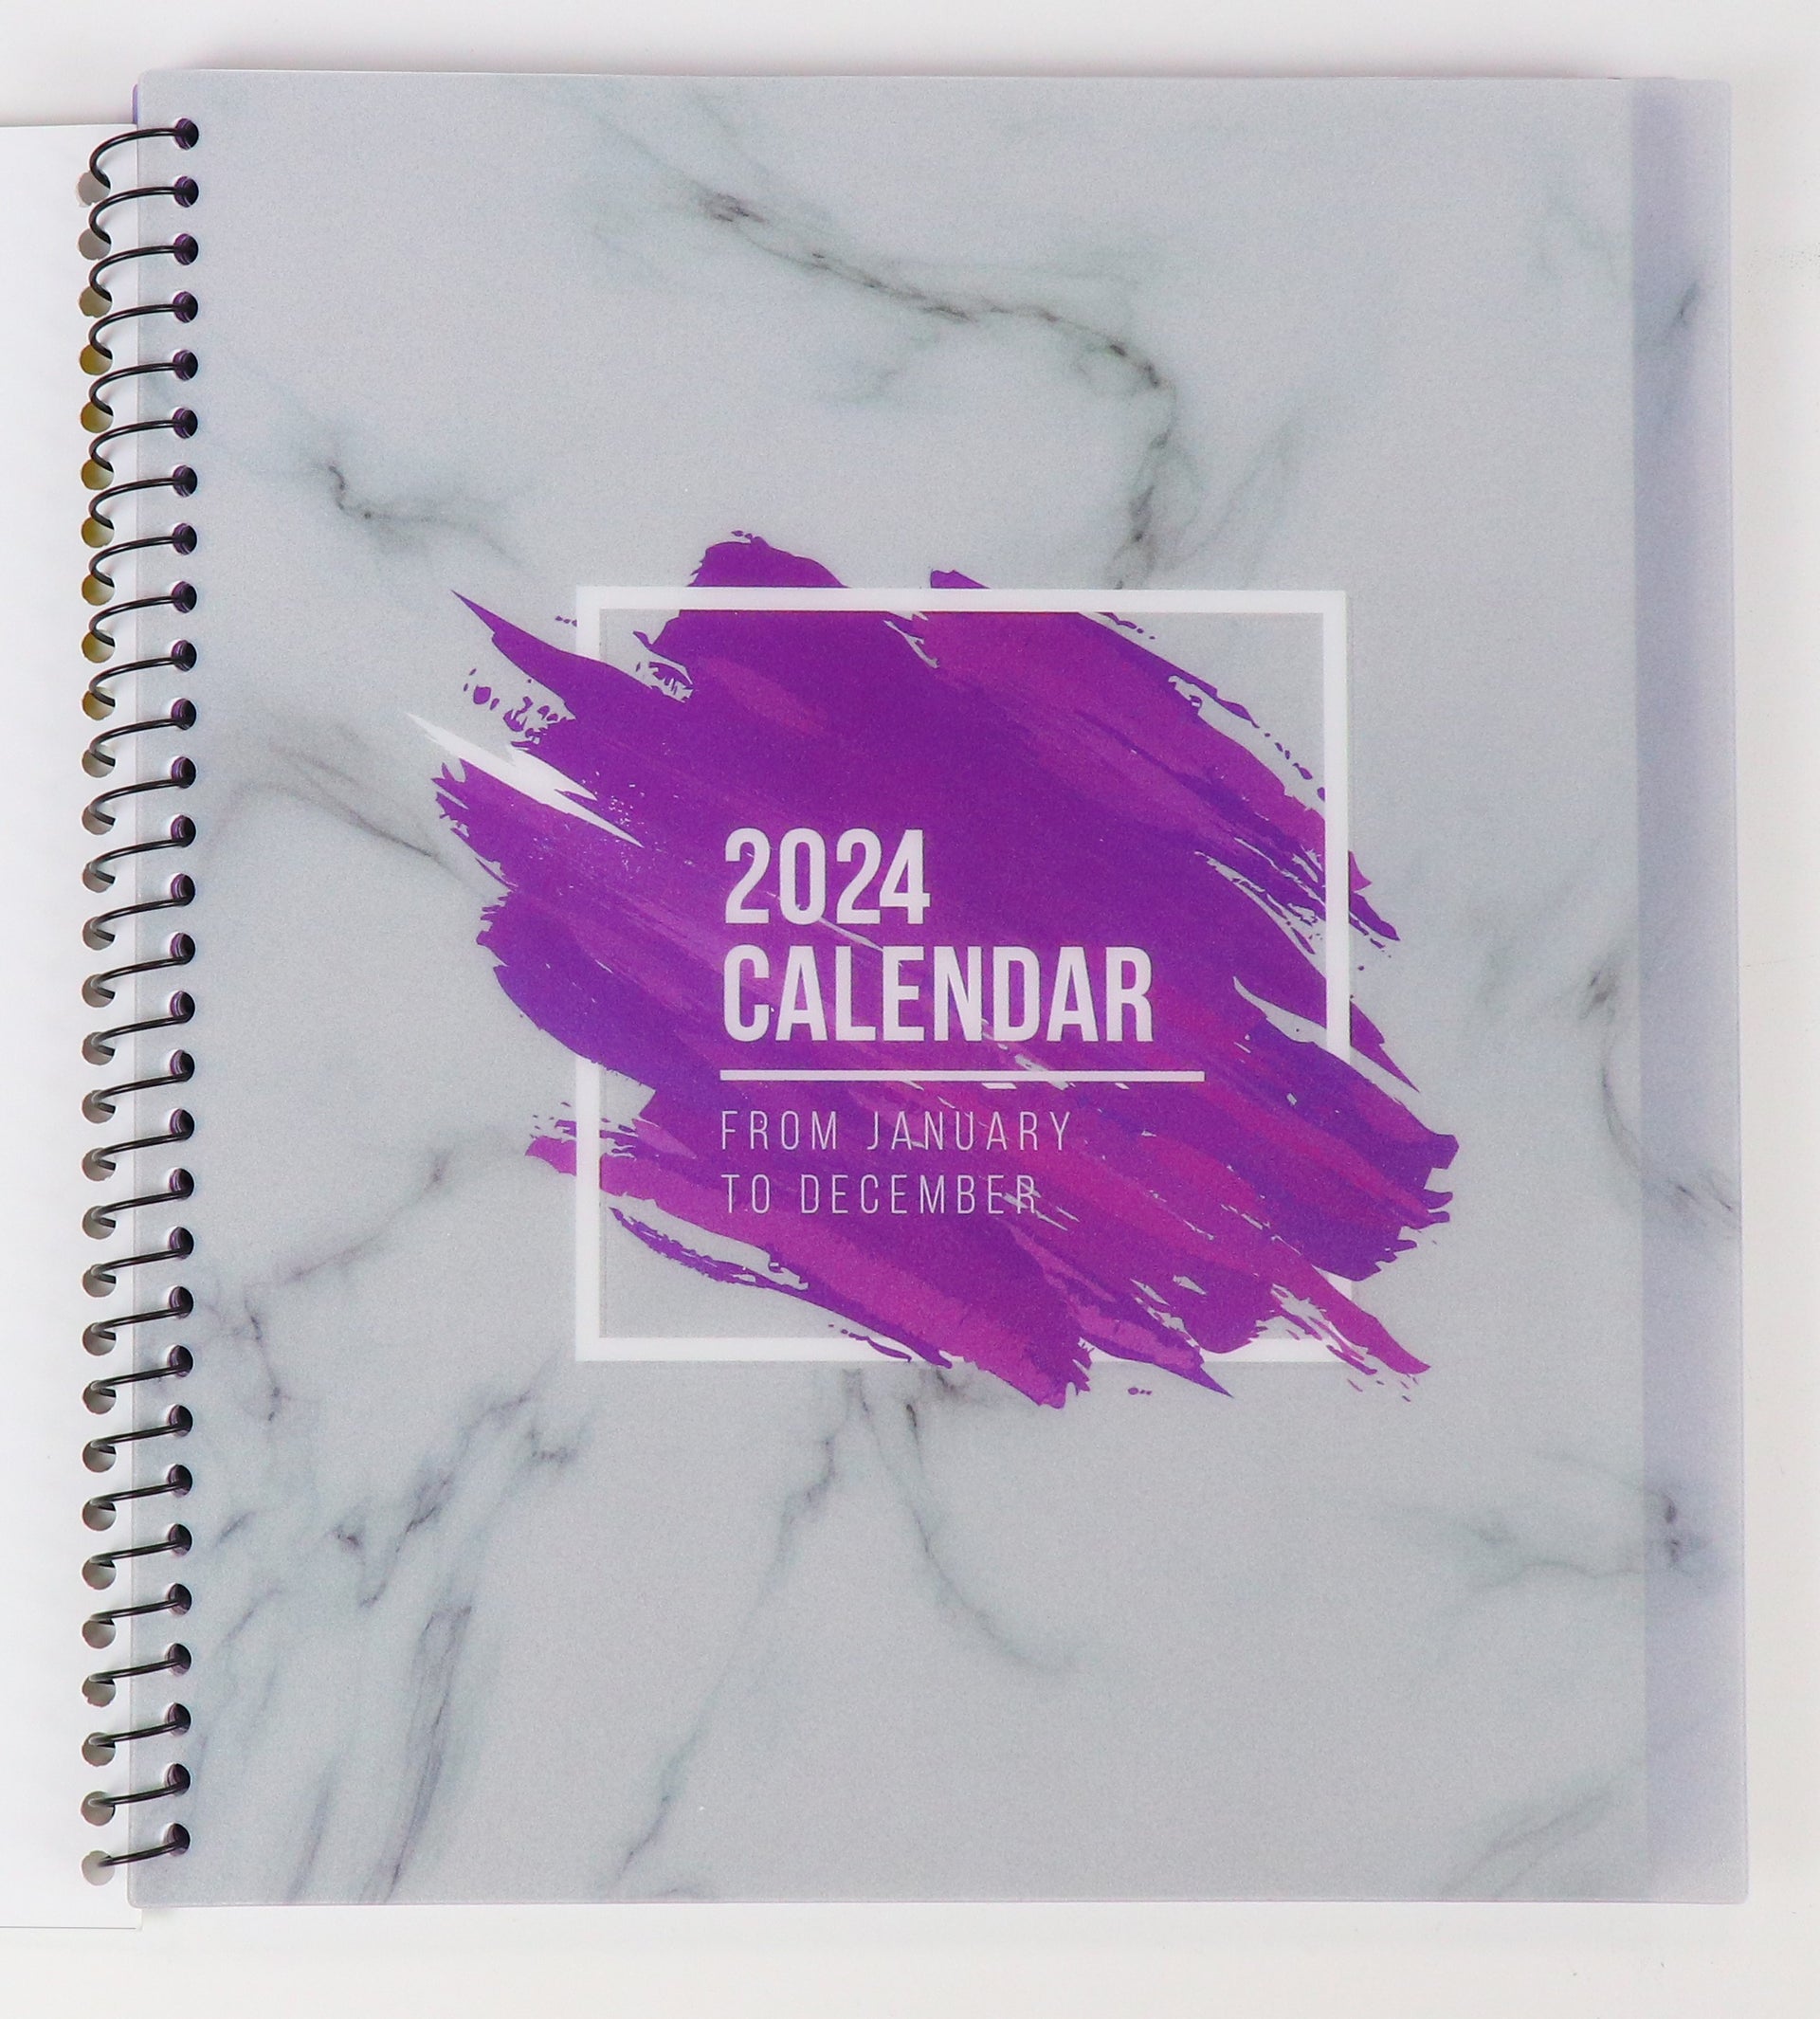 RE-FOCUS THE CREATIVE OFFICE, 2024 Calendar, Monthly and Weekly Views with To-Do List